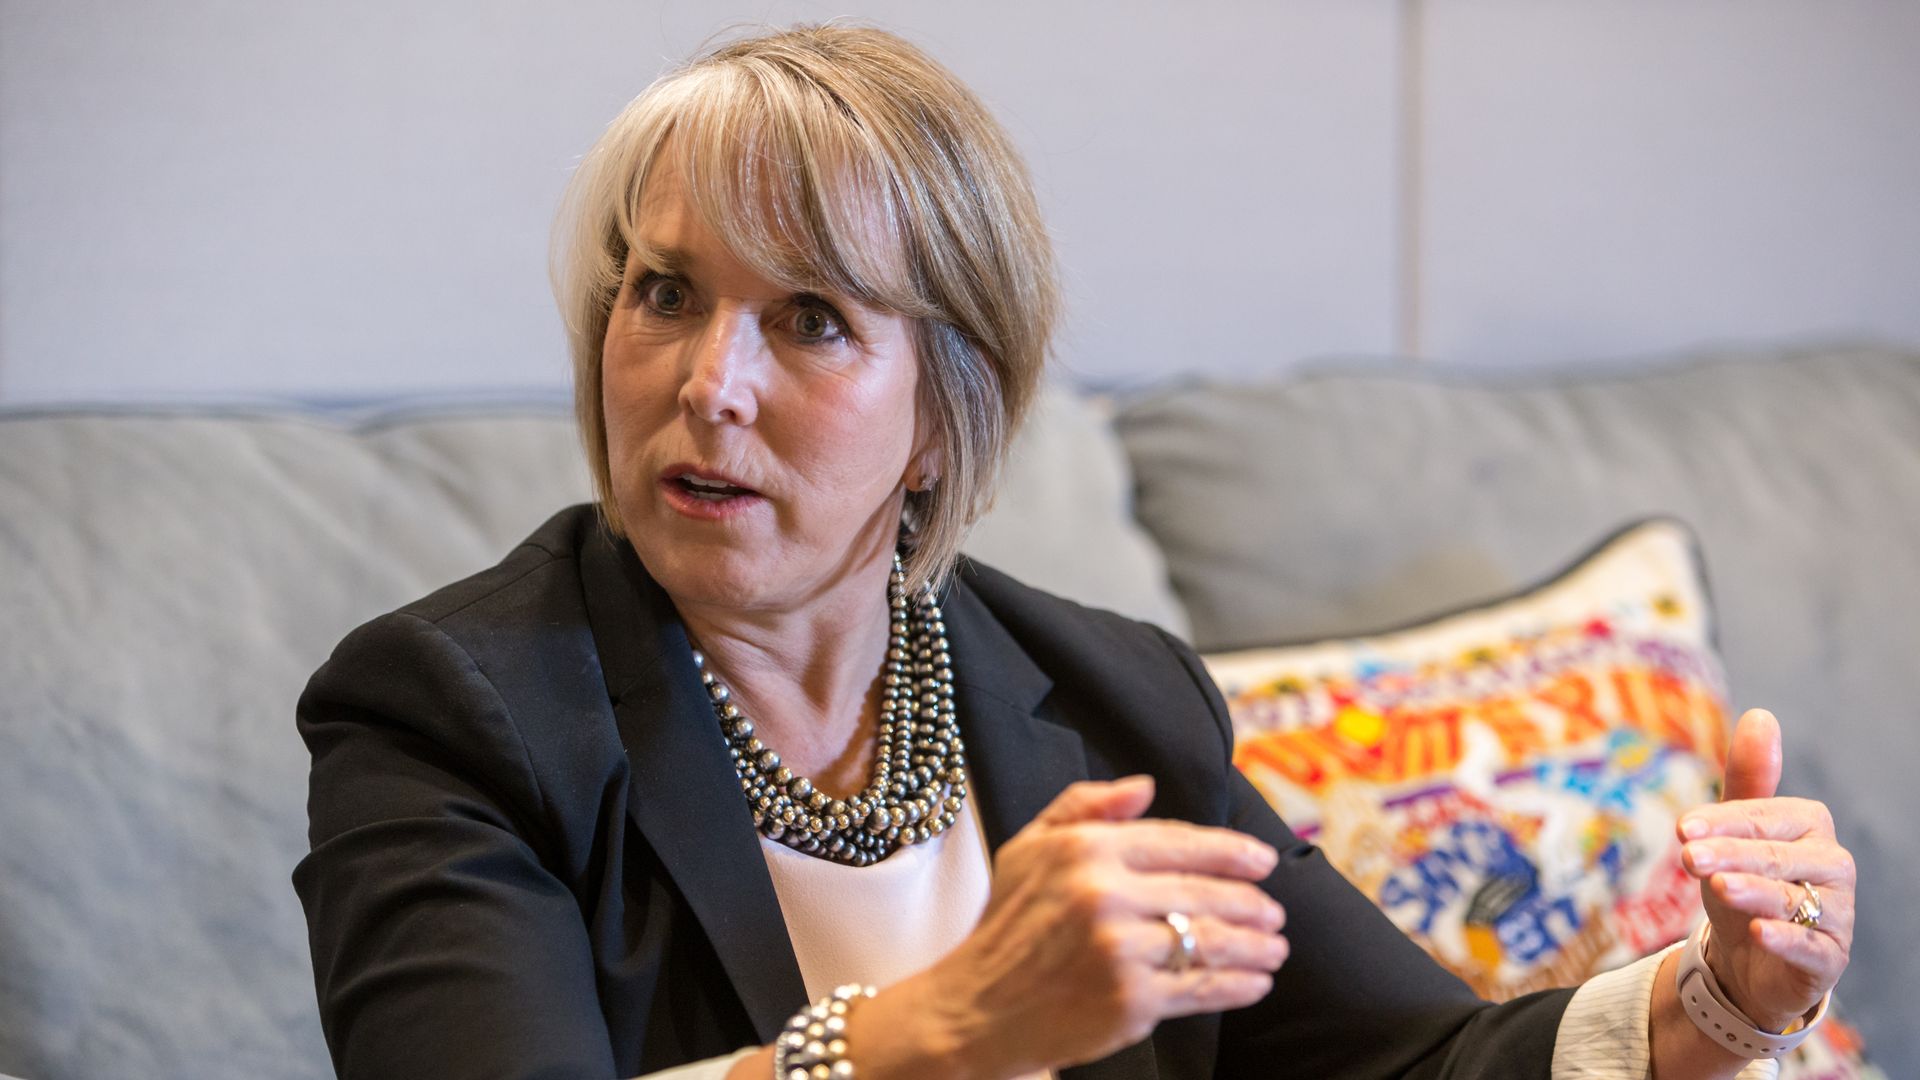 Michelle Lujan Grisham, governor of New Mexico, speaks during an interview at her office in Santa Fe, N.M.